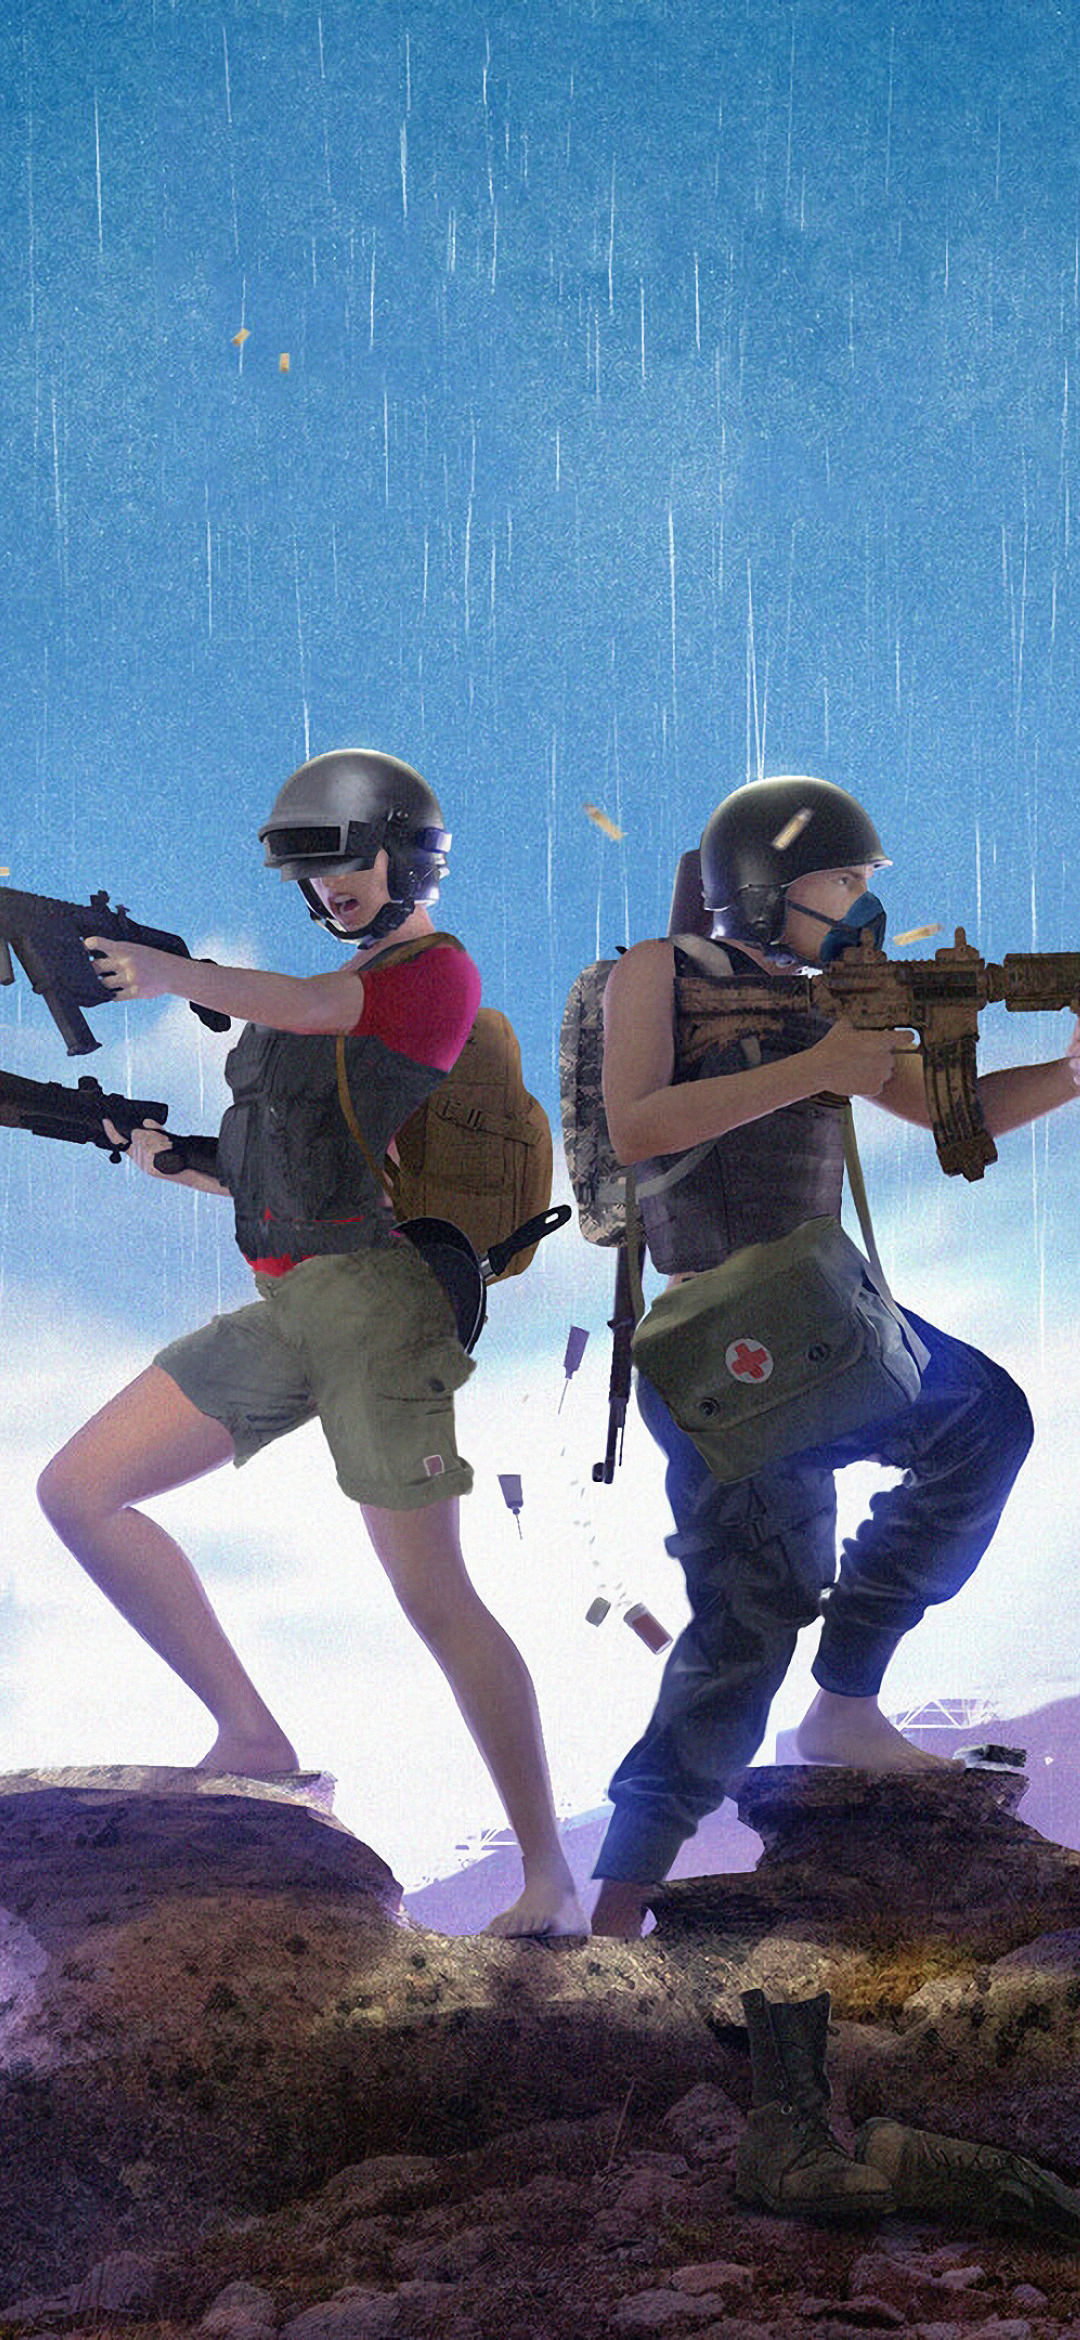 1080x2340 Pubg Girl Art 1080x2340 Resolution Wallpaper Hd Artist 4k Wallpapers Images Photos And Background